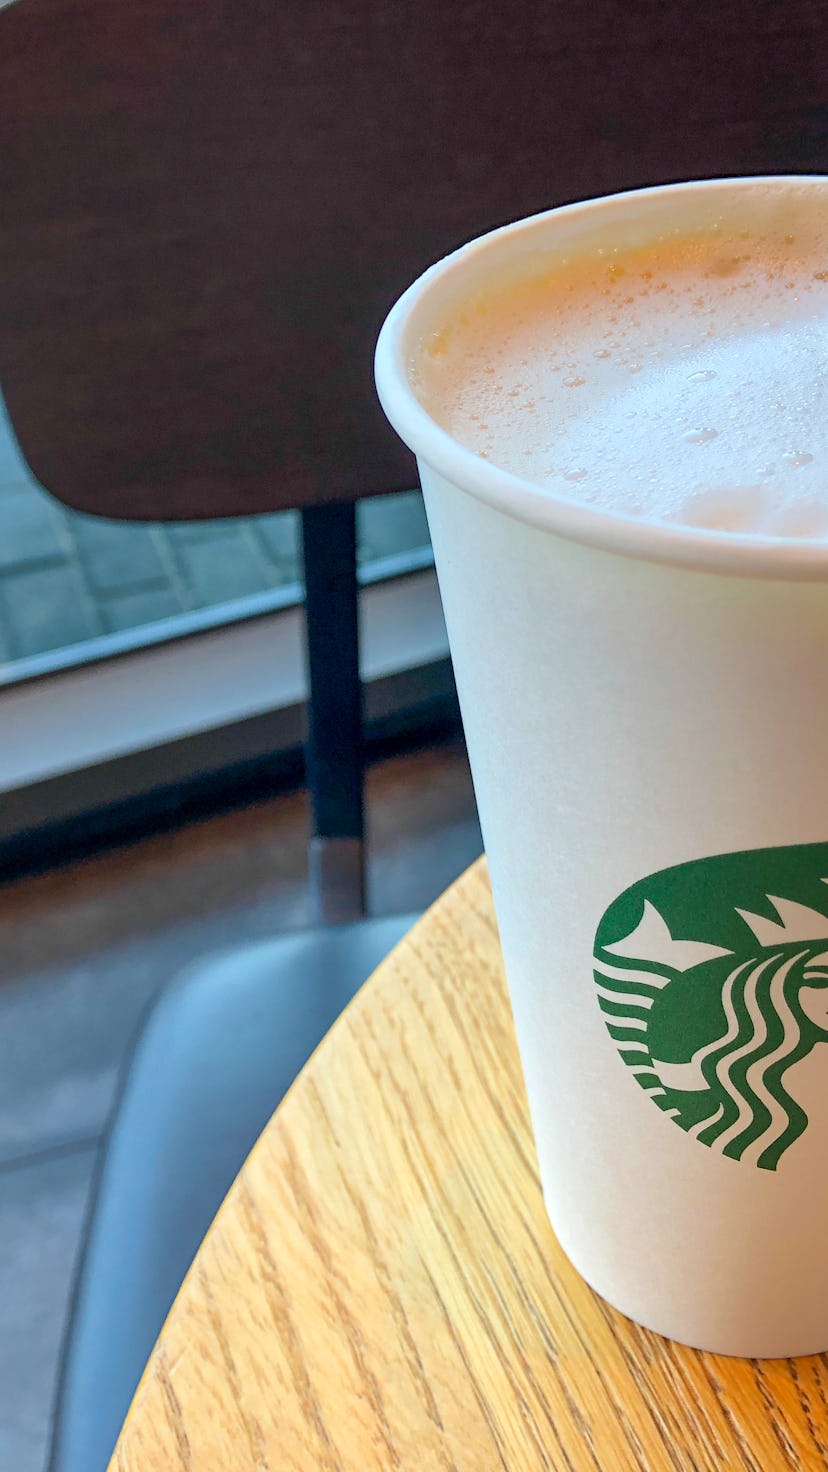 Burgas, Bulgaria - September 17, 2021: Close-up of a cup of coffee at Starbucks at the Mall Gallery.